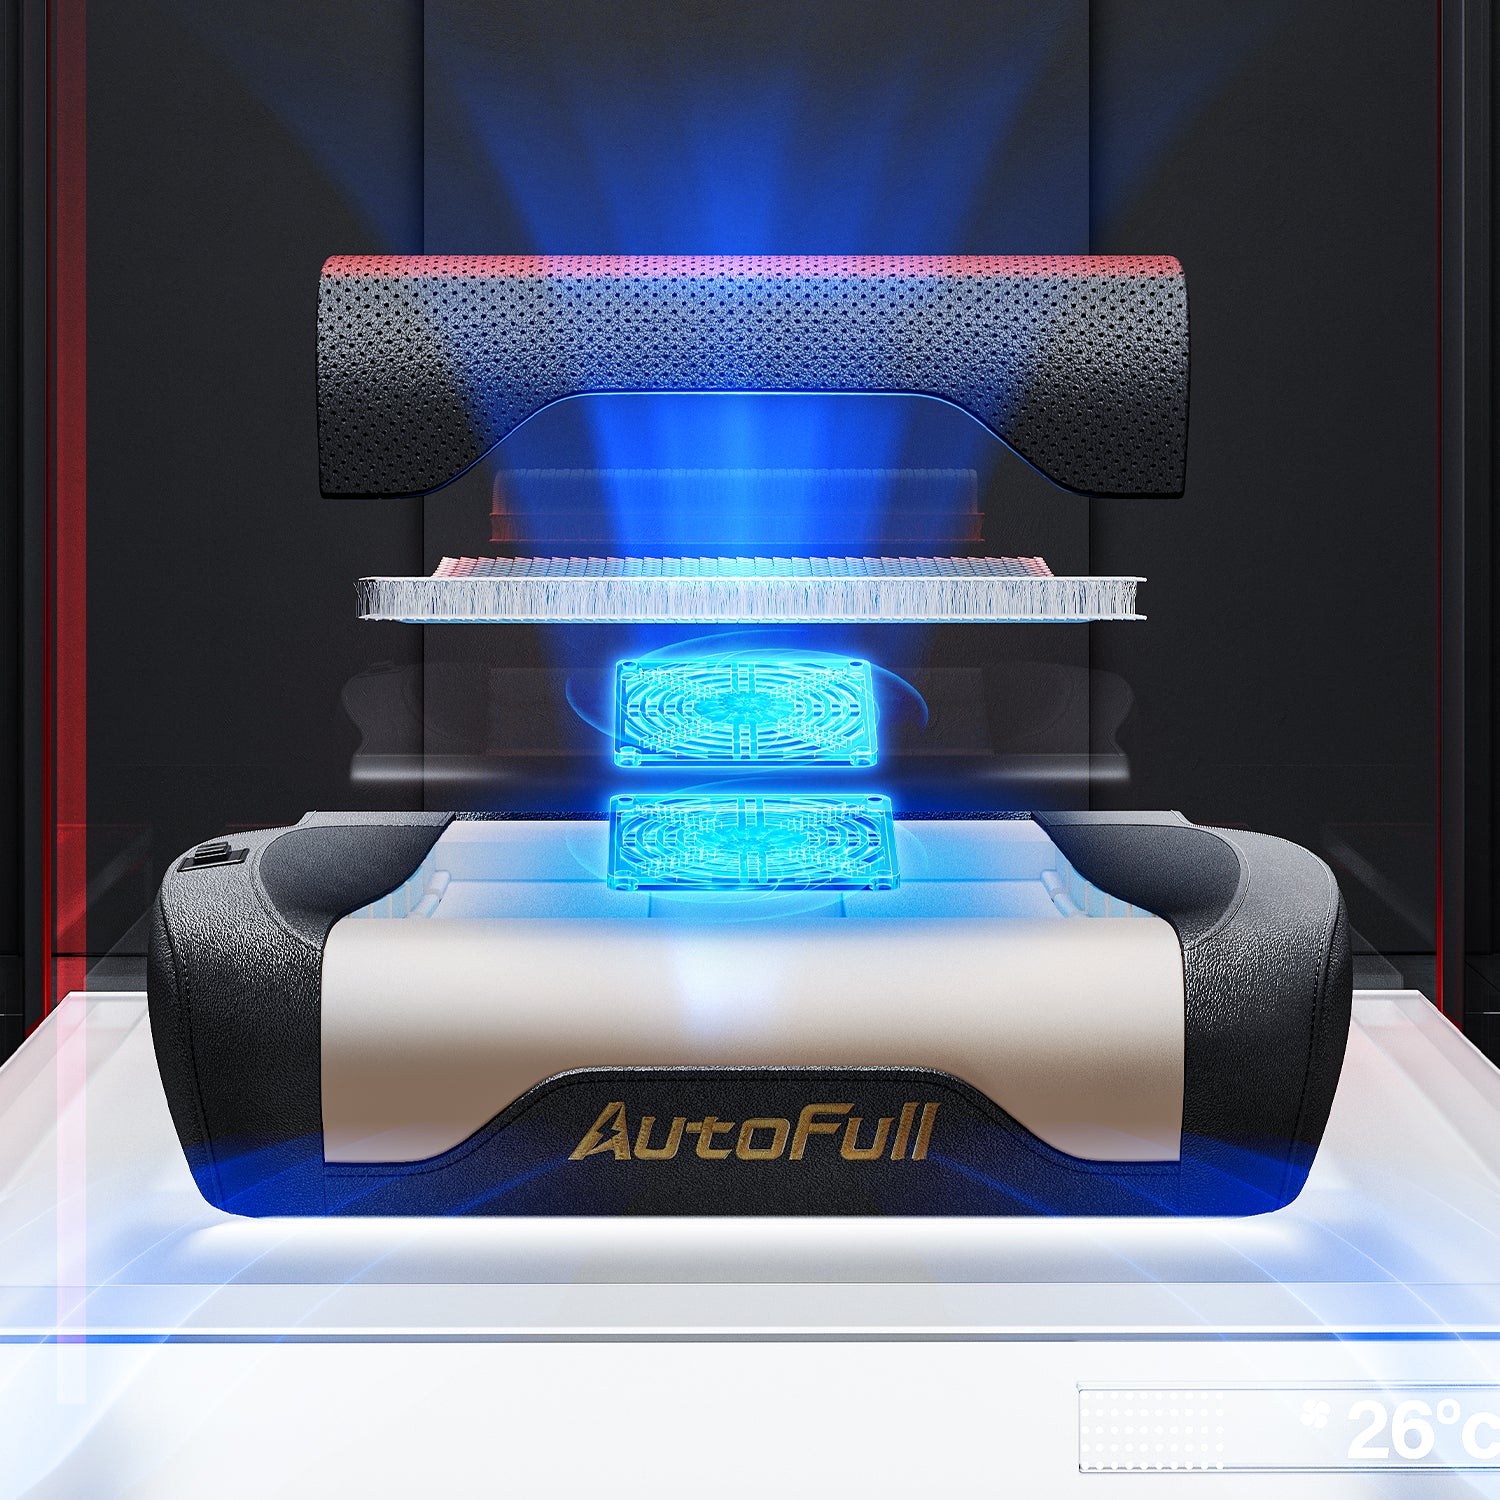 AutoFull M6 Gaming Chair Pro+, Ventilated and Heated Seat Cushion